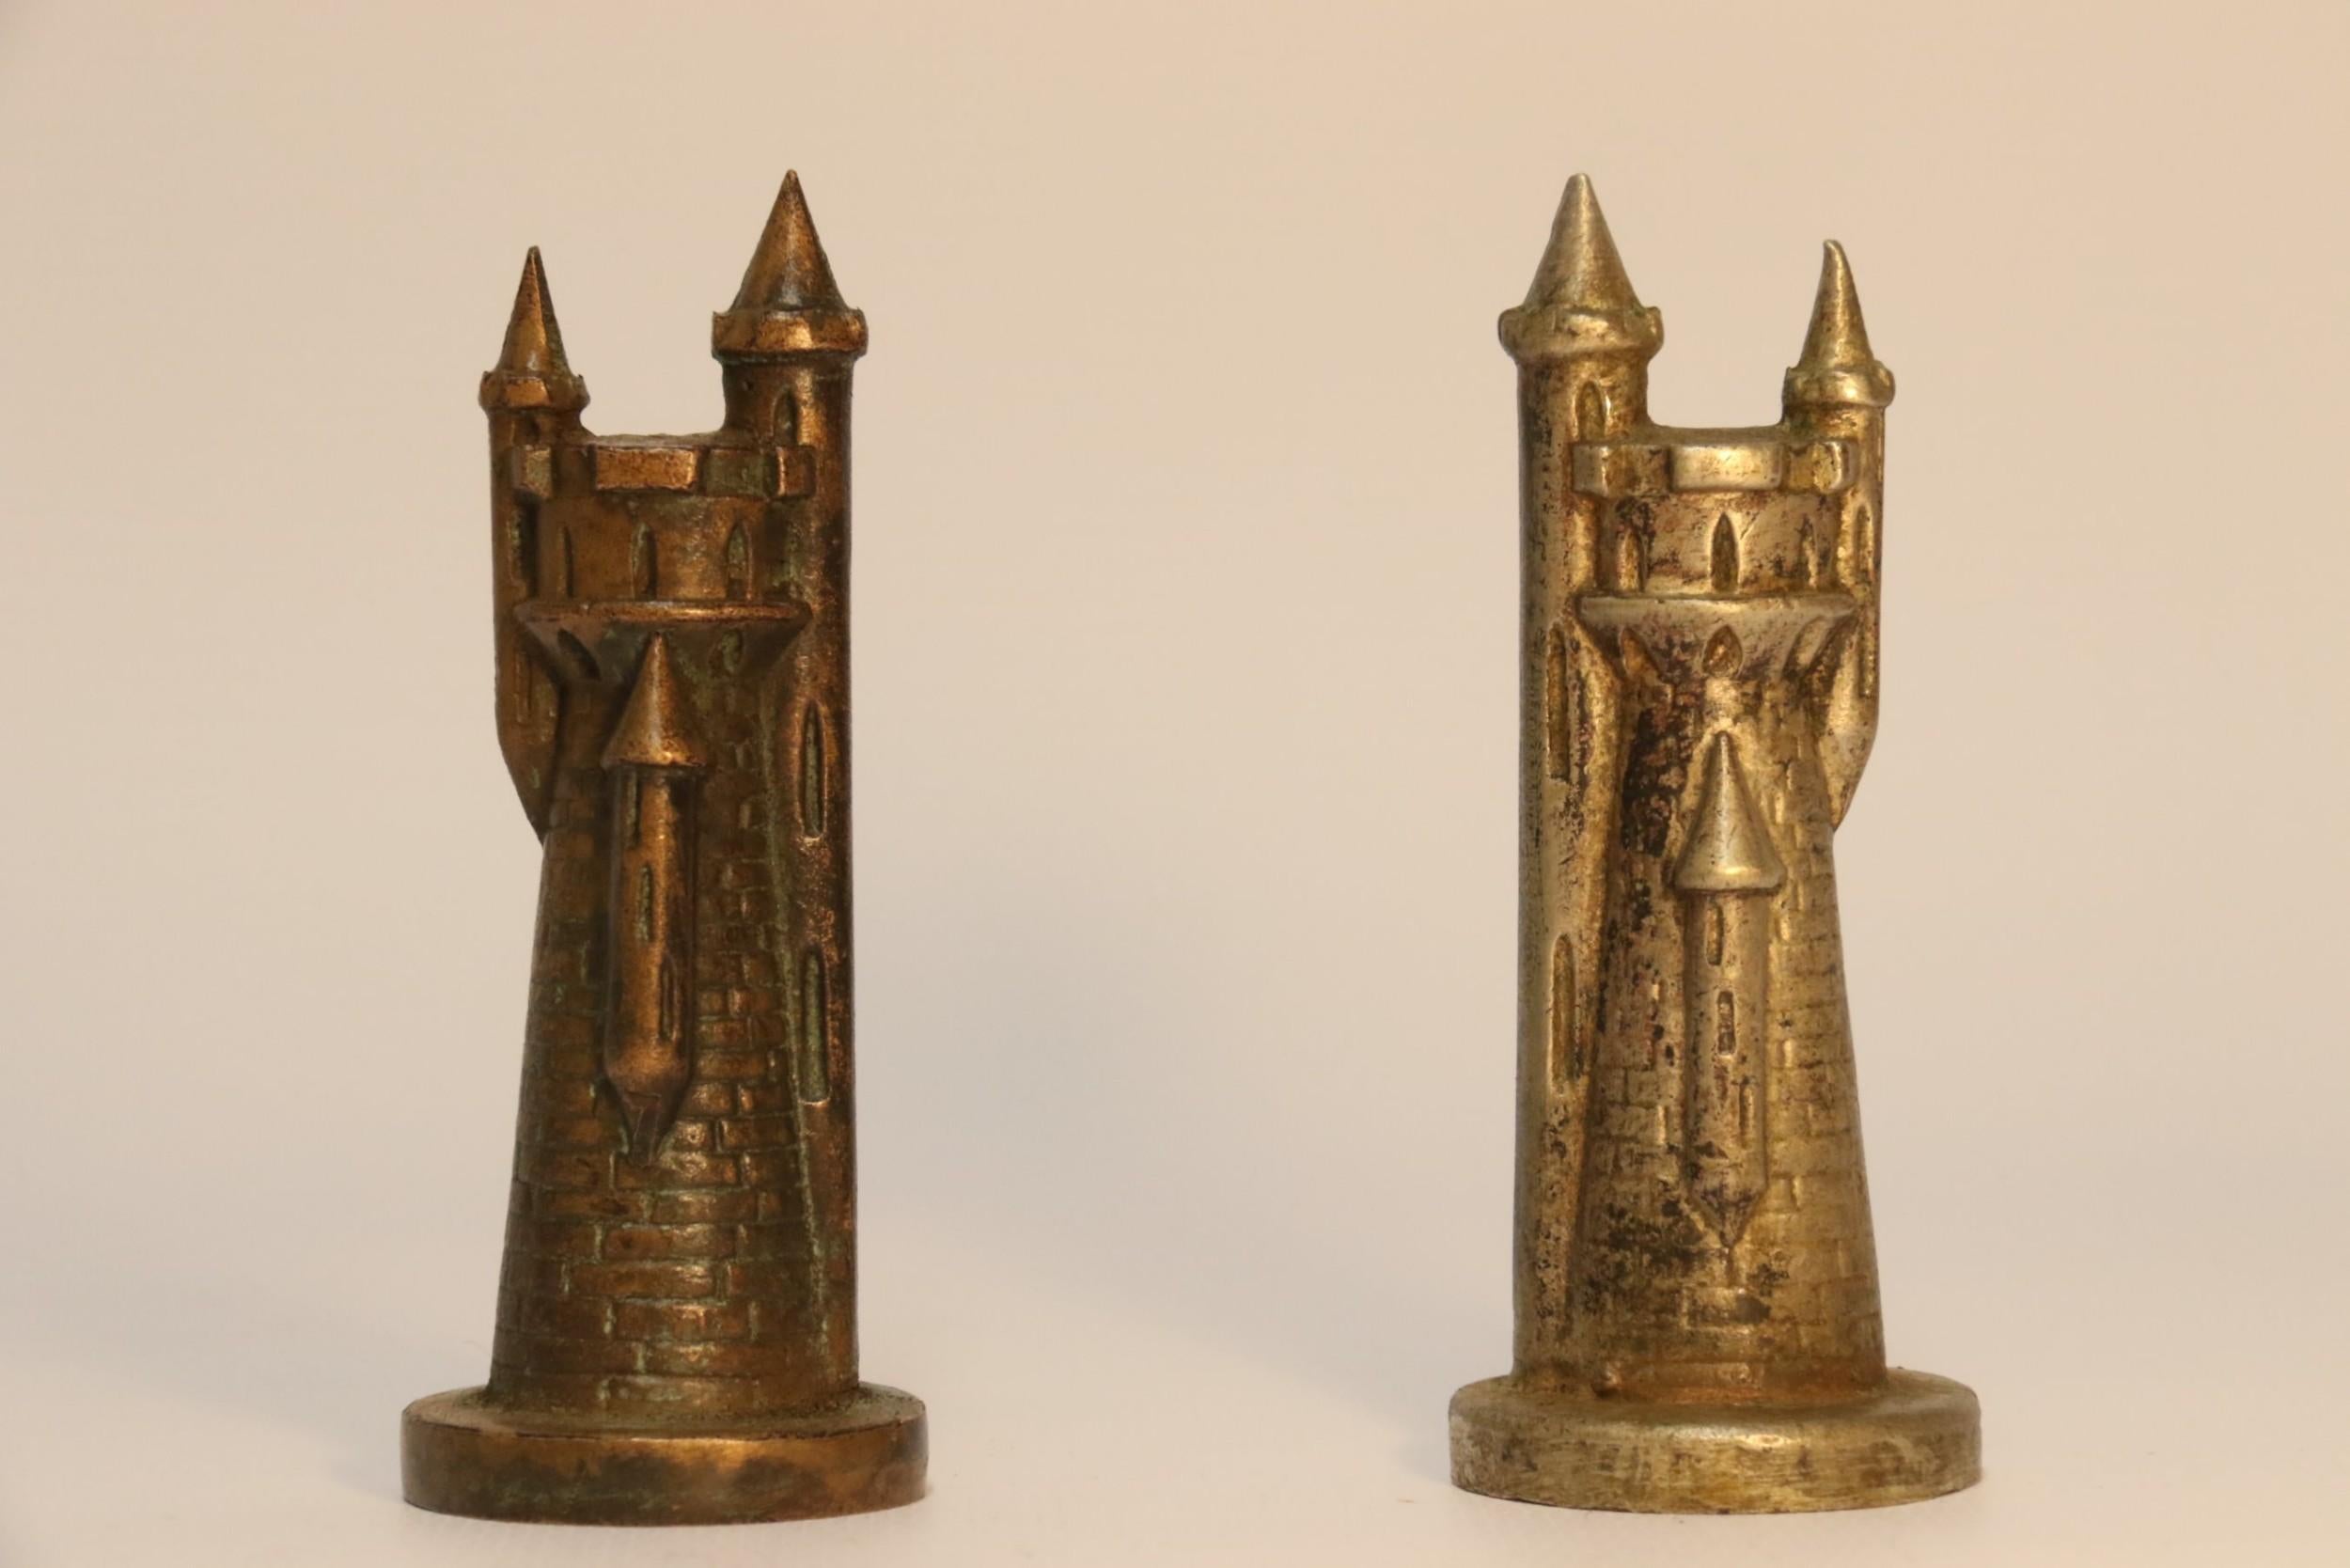 Novelty Heavy Cast Nickel and Bronze Chess Set Modeled on Medieval Figures For Sale 10